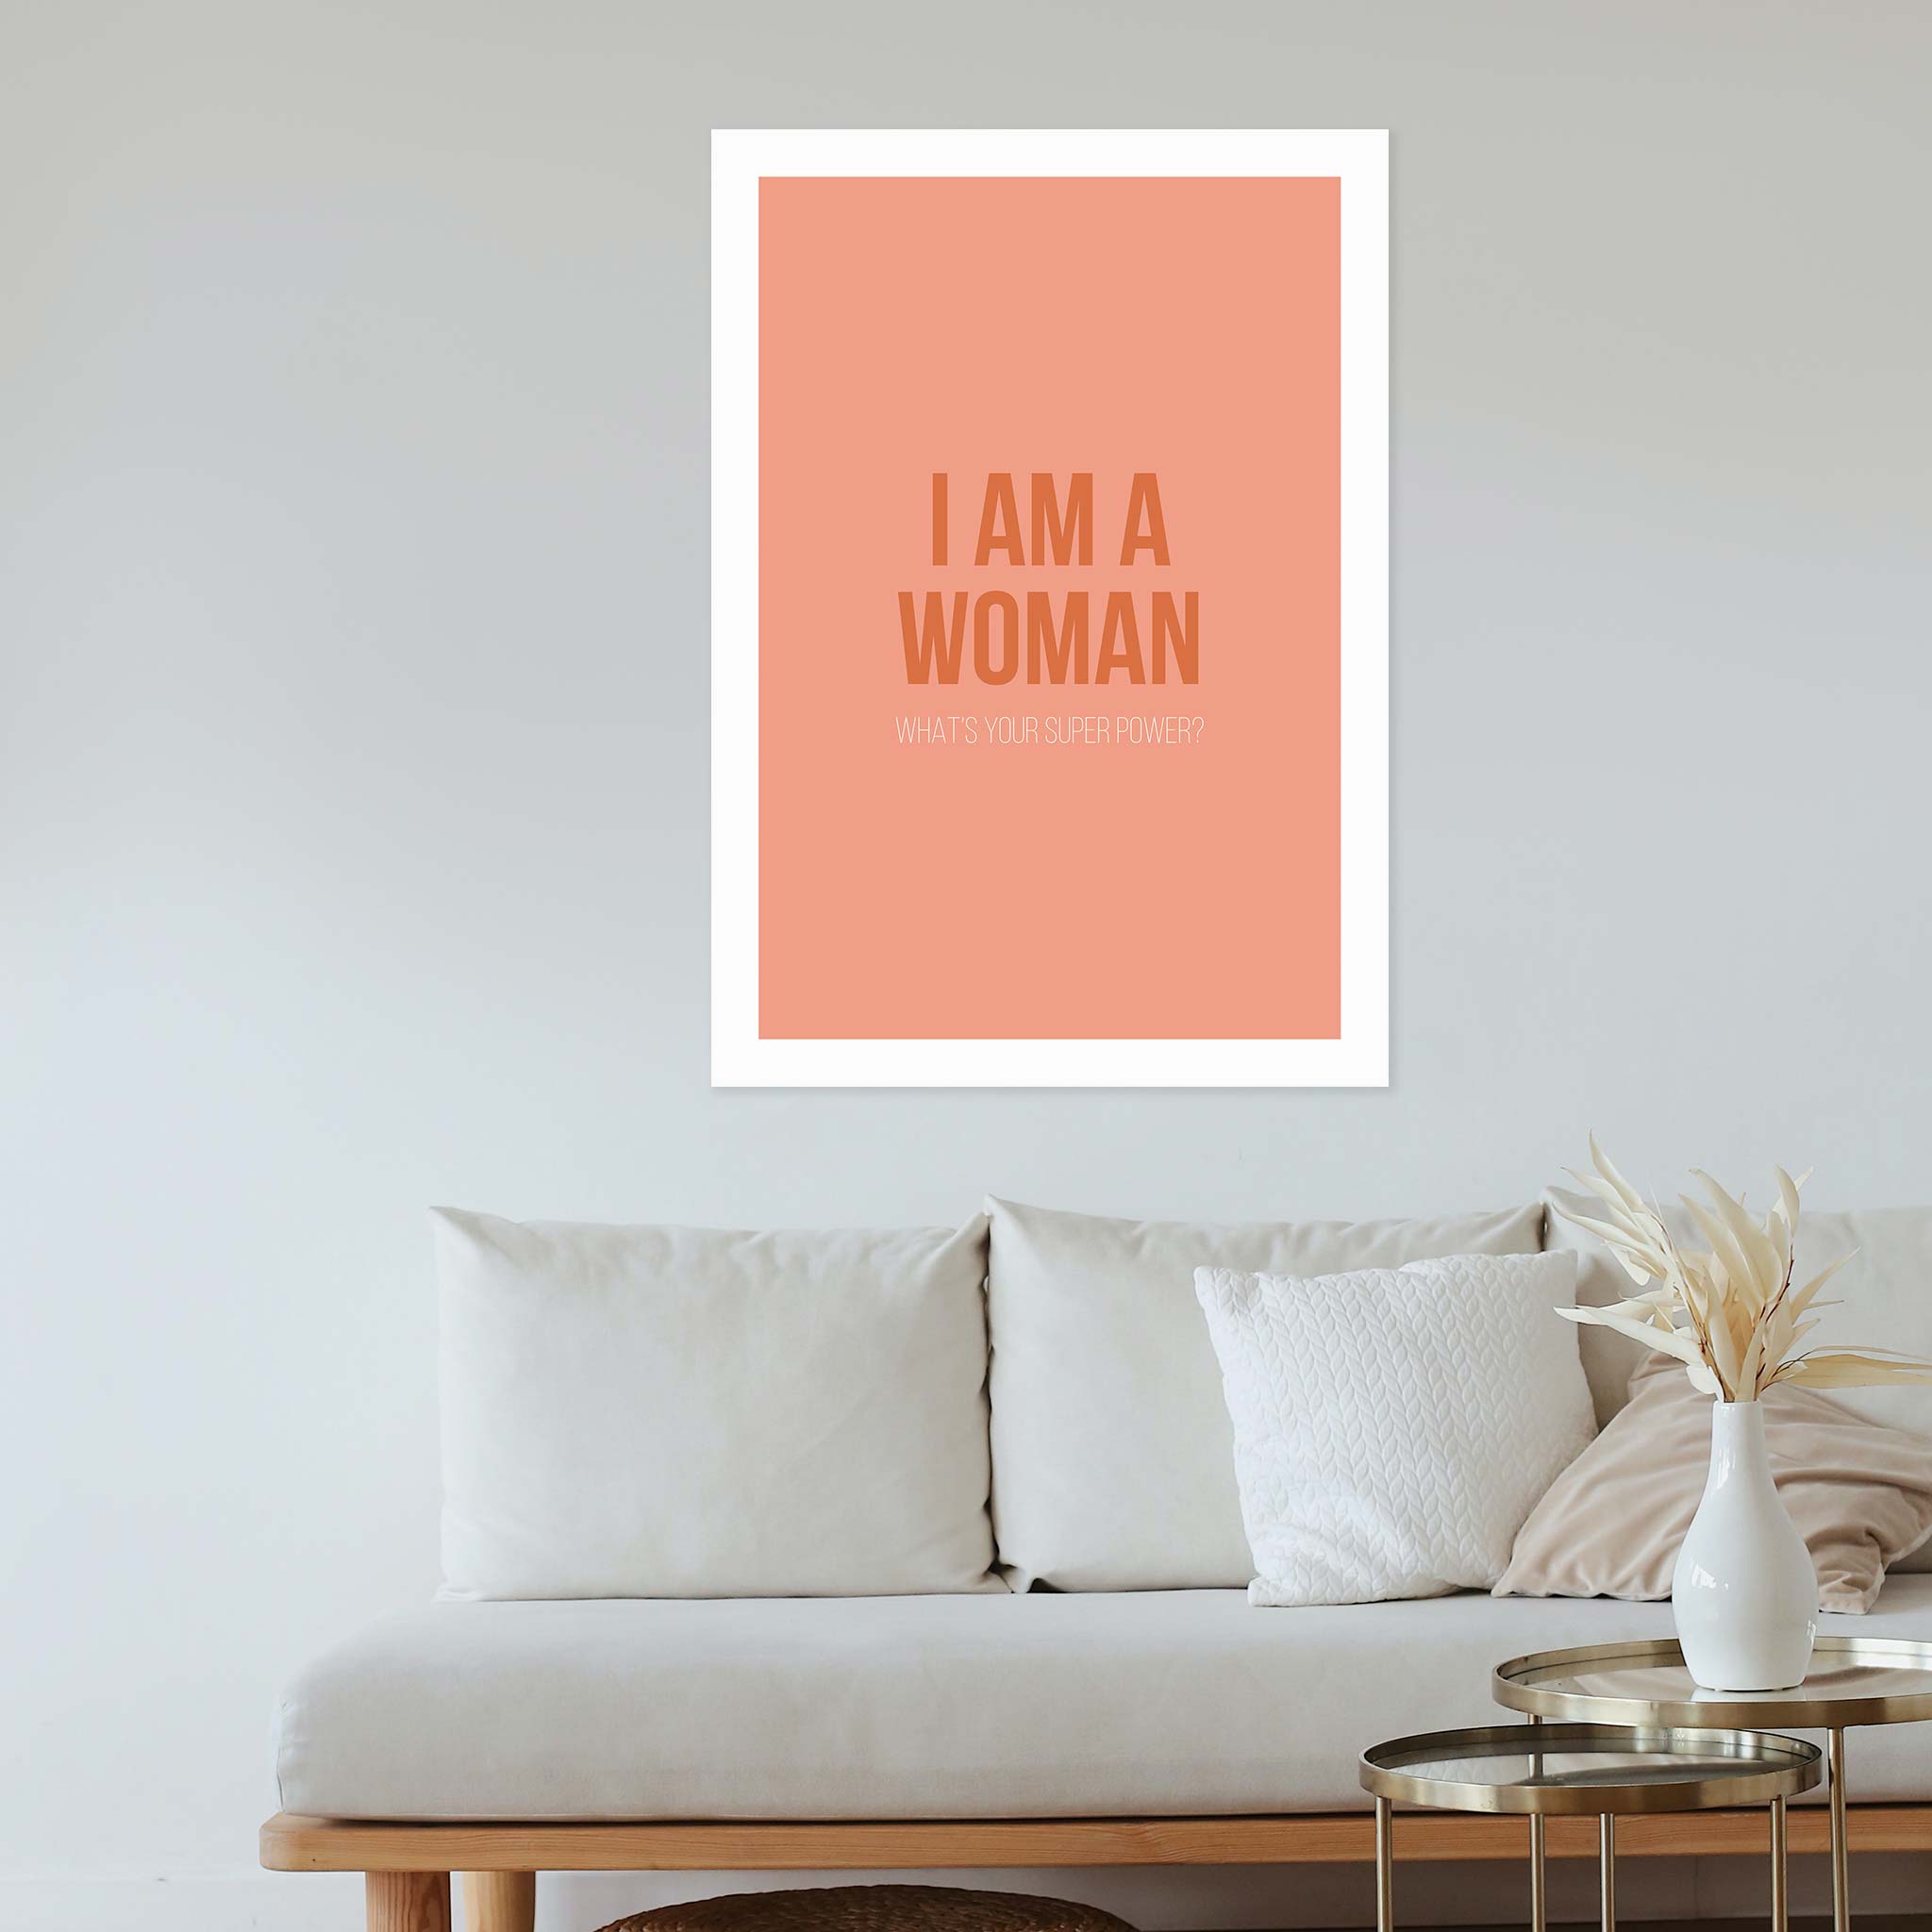 I am a women, what’s your super power?